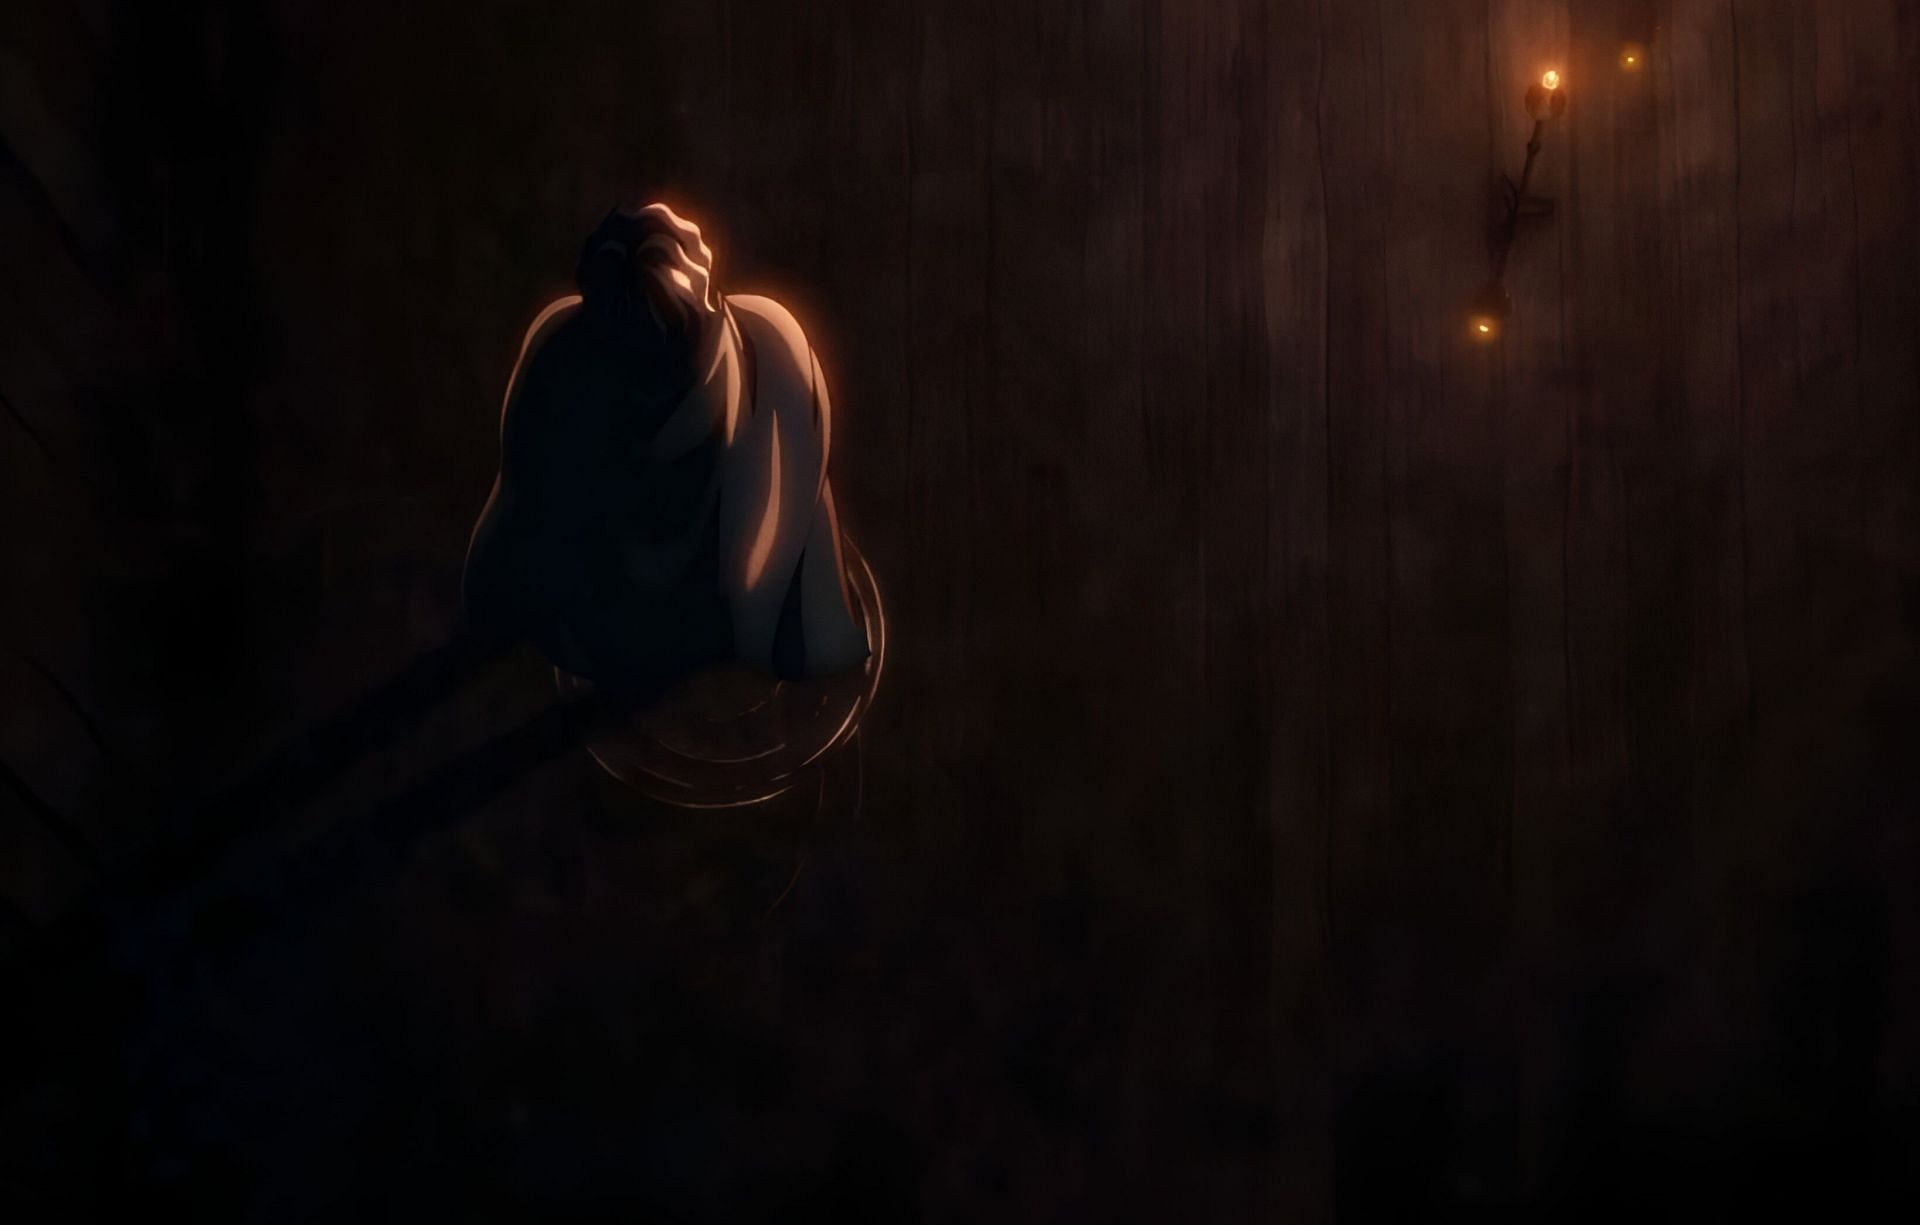 The water ripples seem to be an important element in the Demon Slayer season 4 ending (Image via Ufotable)